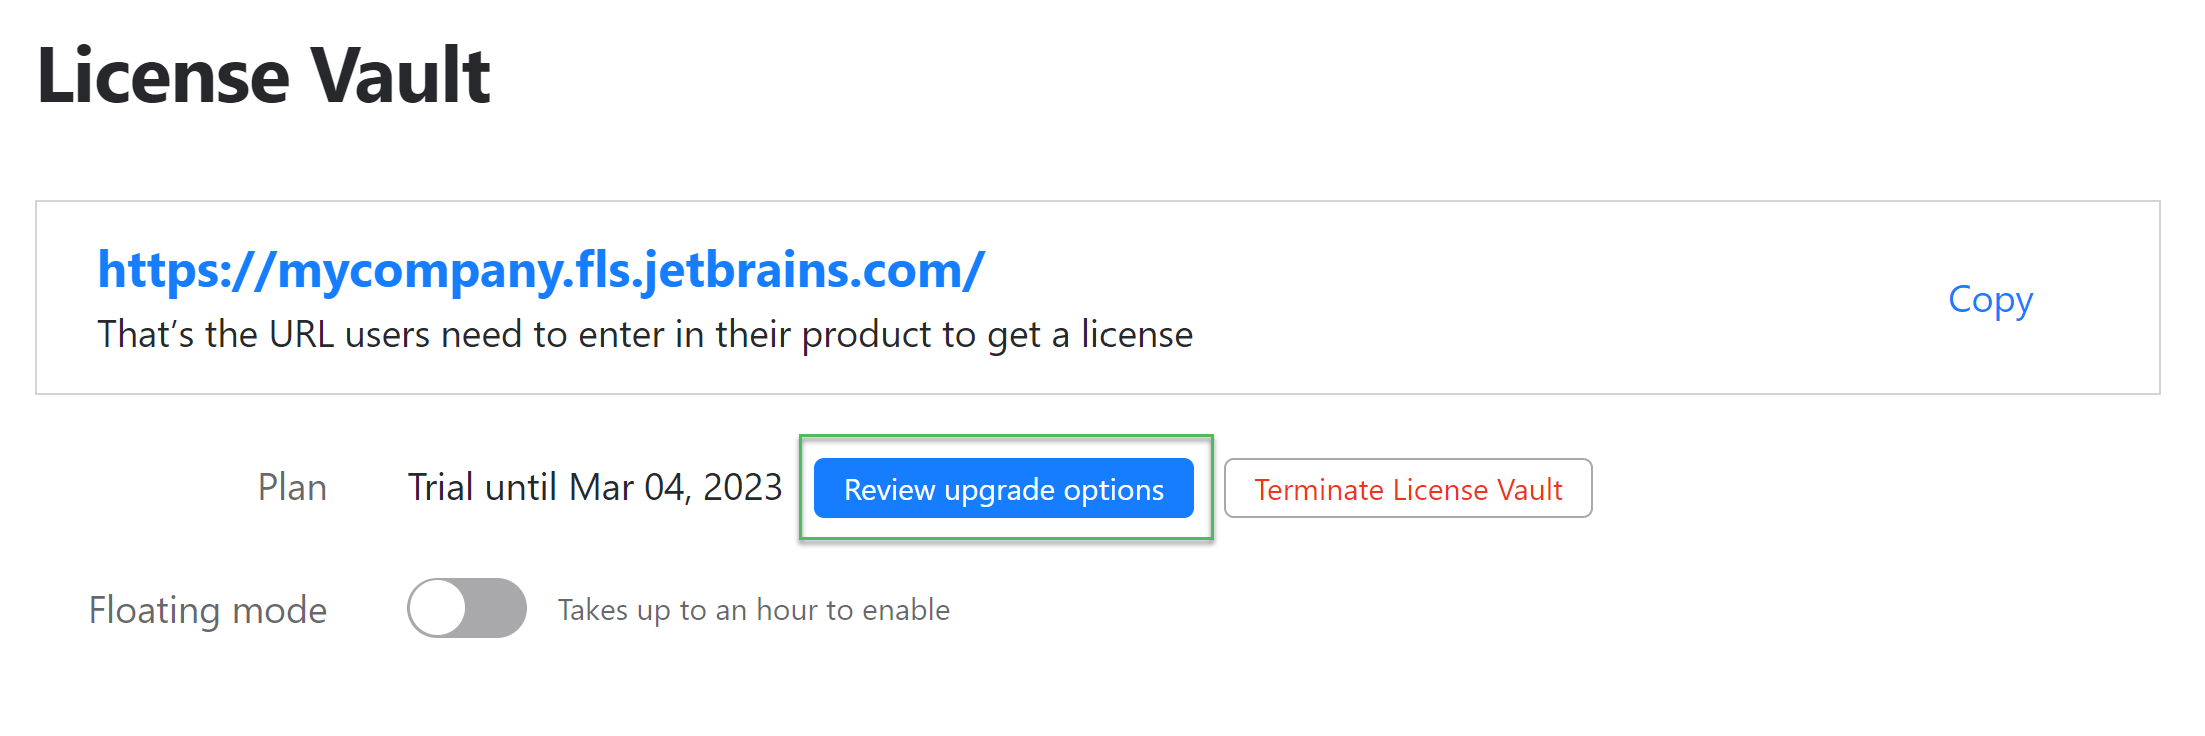 The button to review upgrade options on the License Vault settings page during the trial period